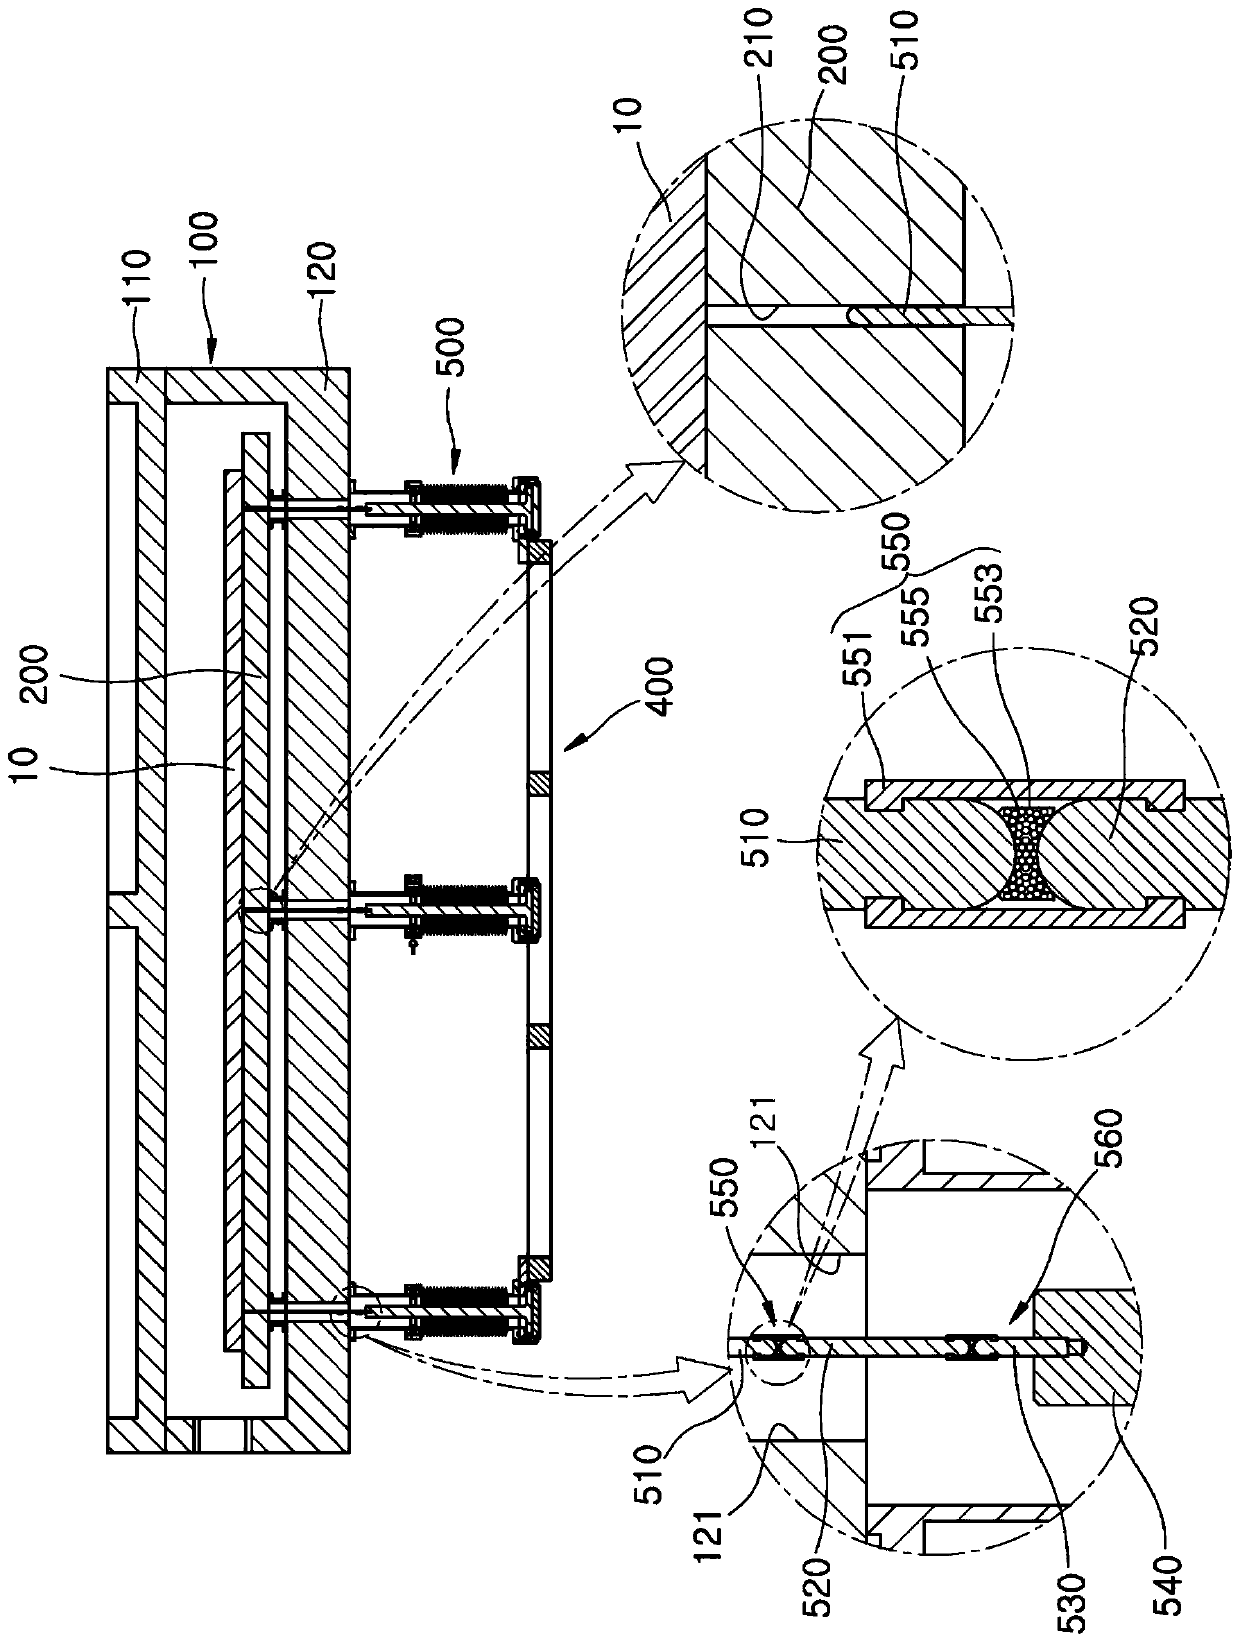 Substrate handling apparatus with lift pin assembly